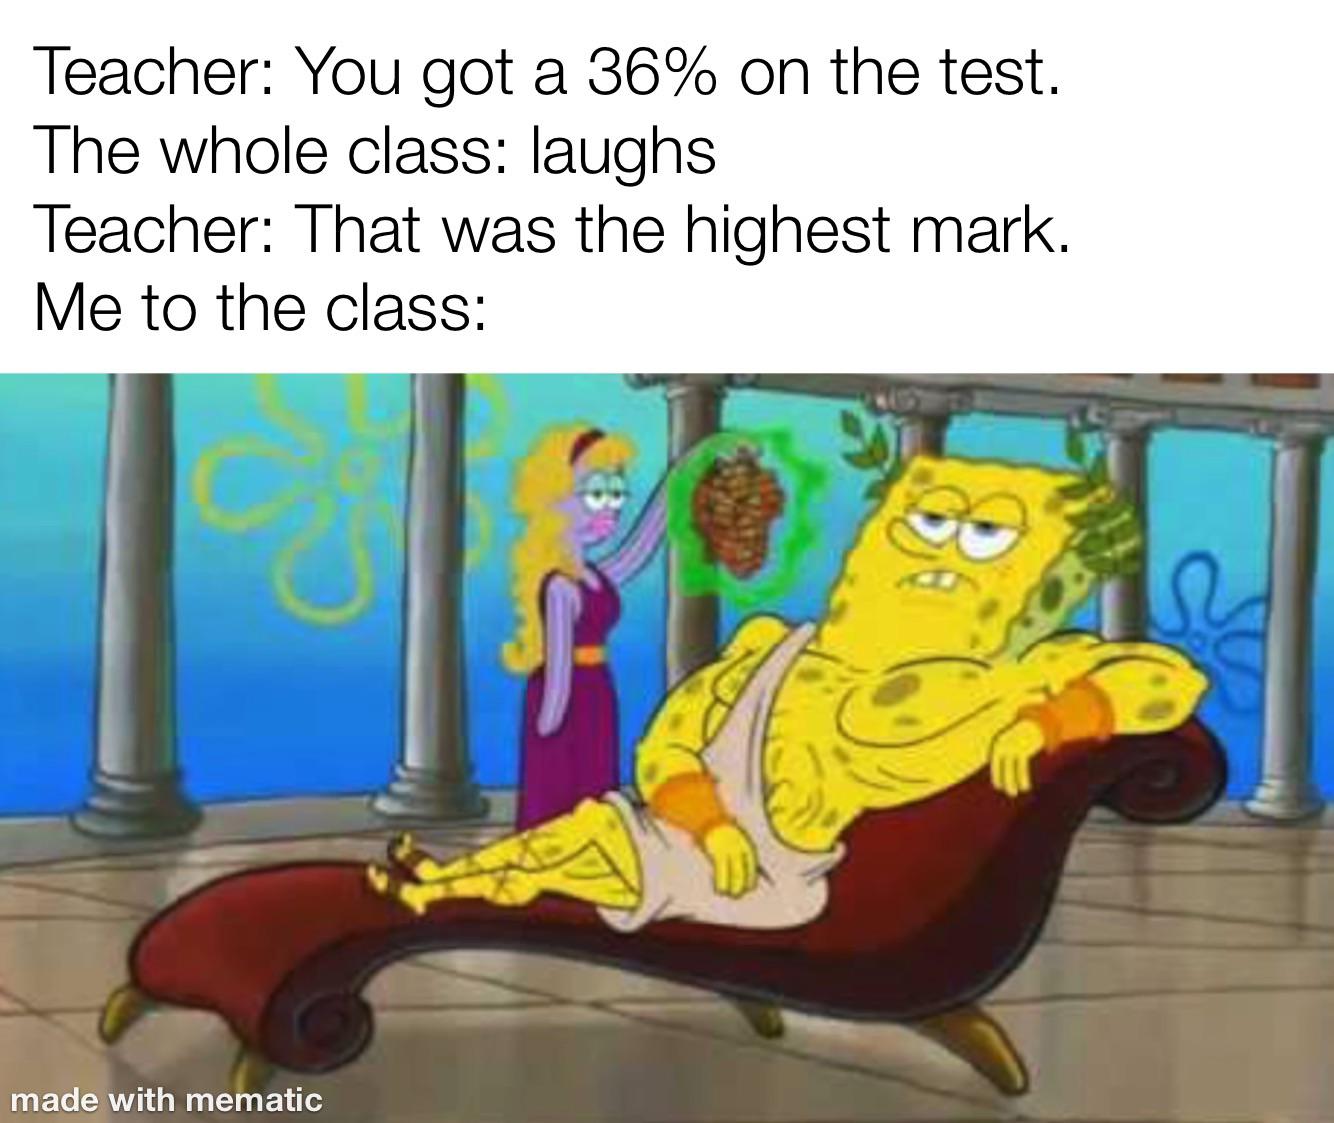 funny memes - cartoon - Teacher You got a 36% on the test. The whole class laughs Teacher That was the highest mark. Me to the class made with mematic Ats